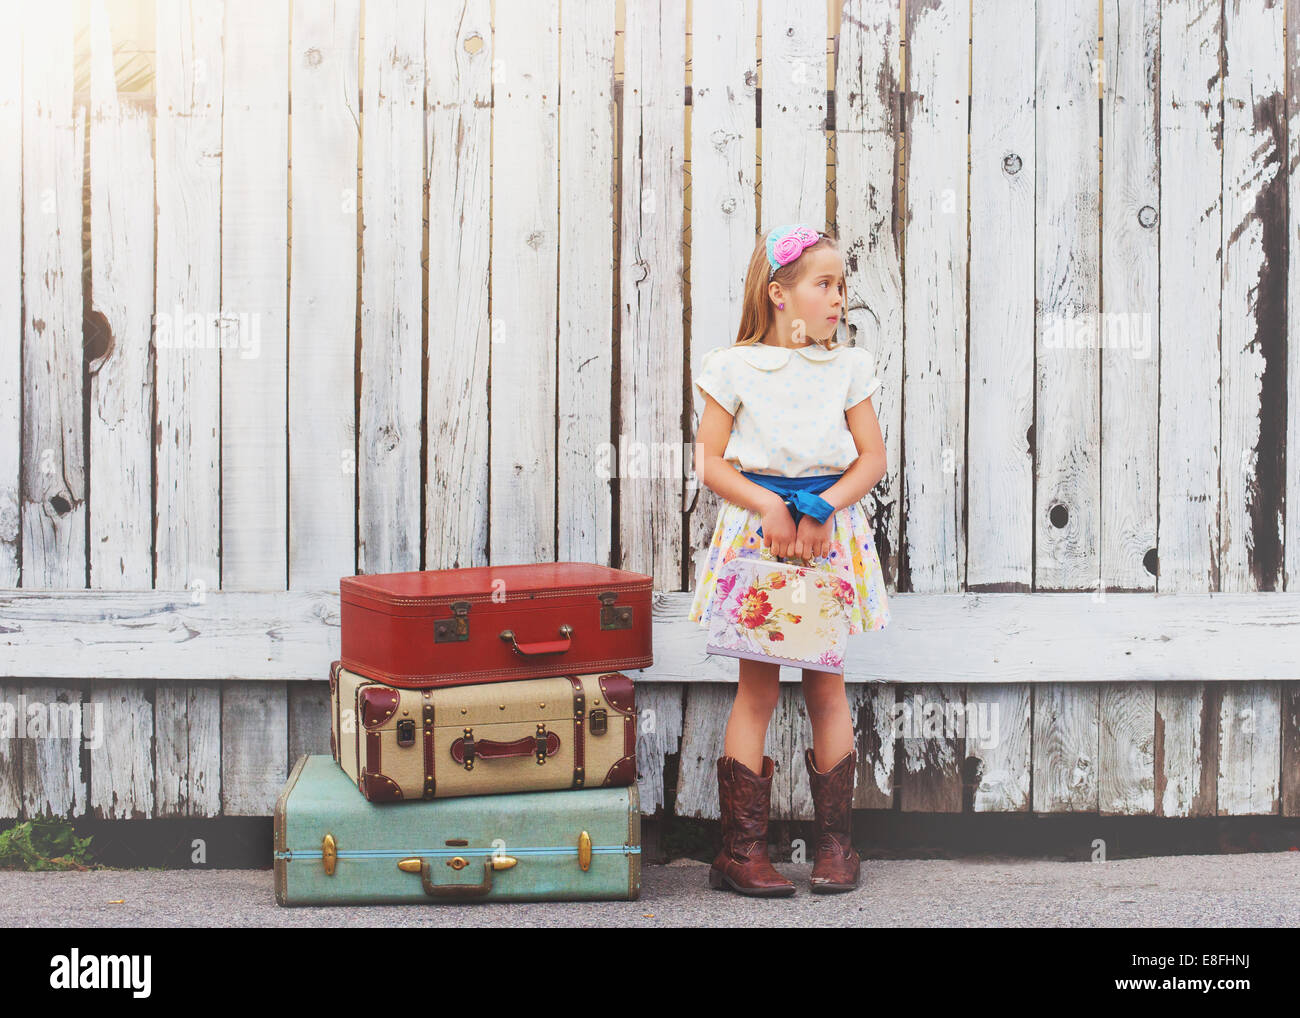 Girl standing by a stack of suitcases outdoors, California, USA Stock Photo